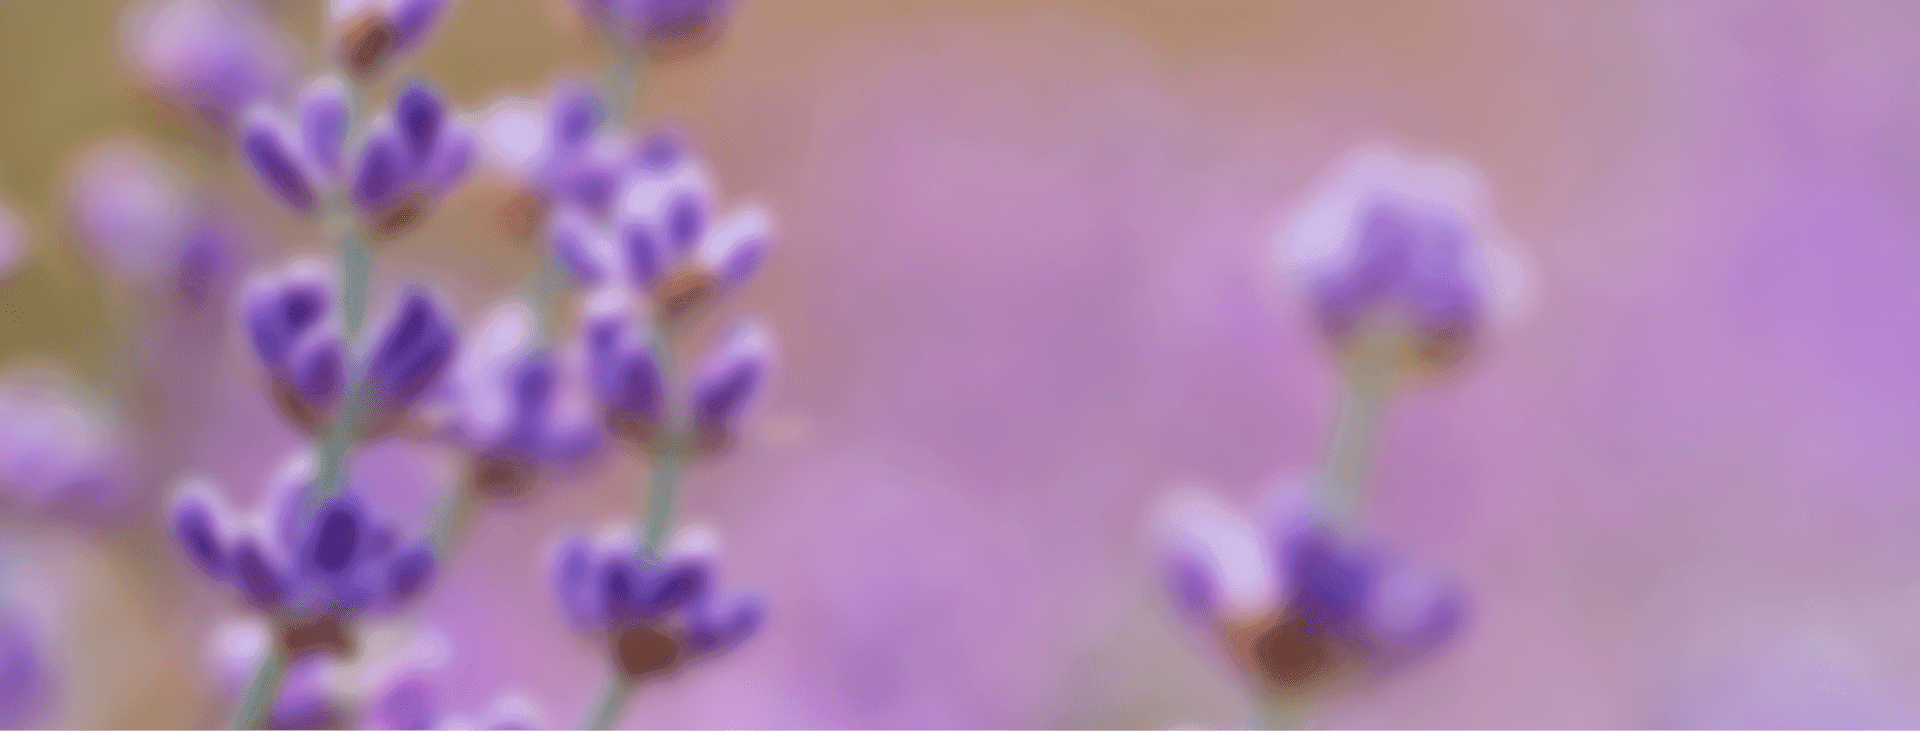 Blurred flowers on a purple background